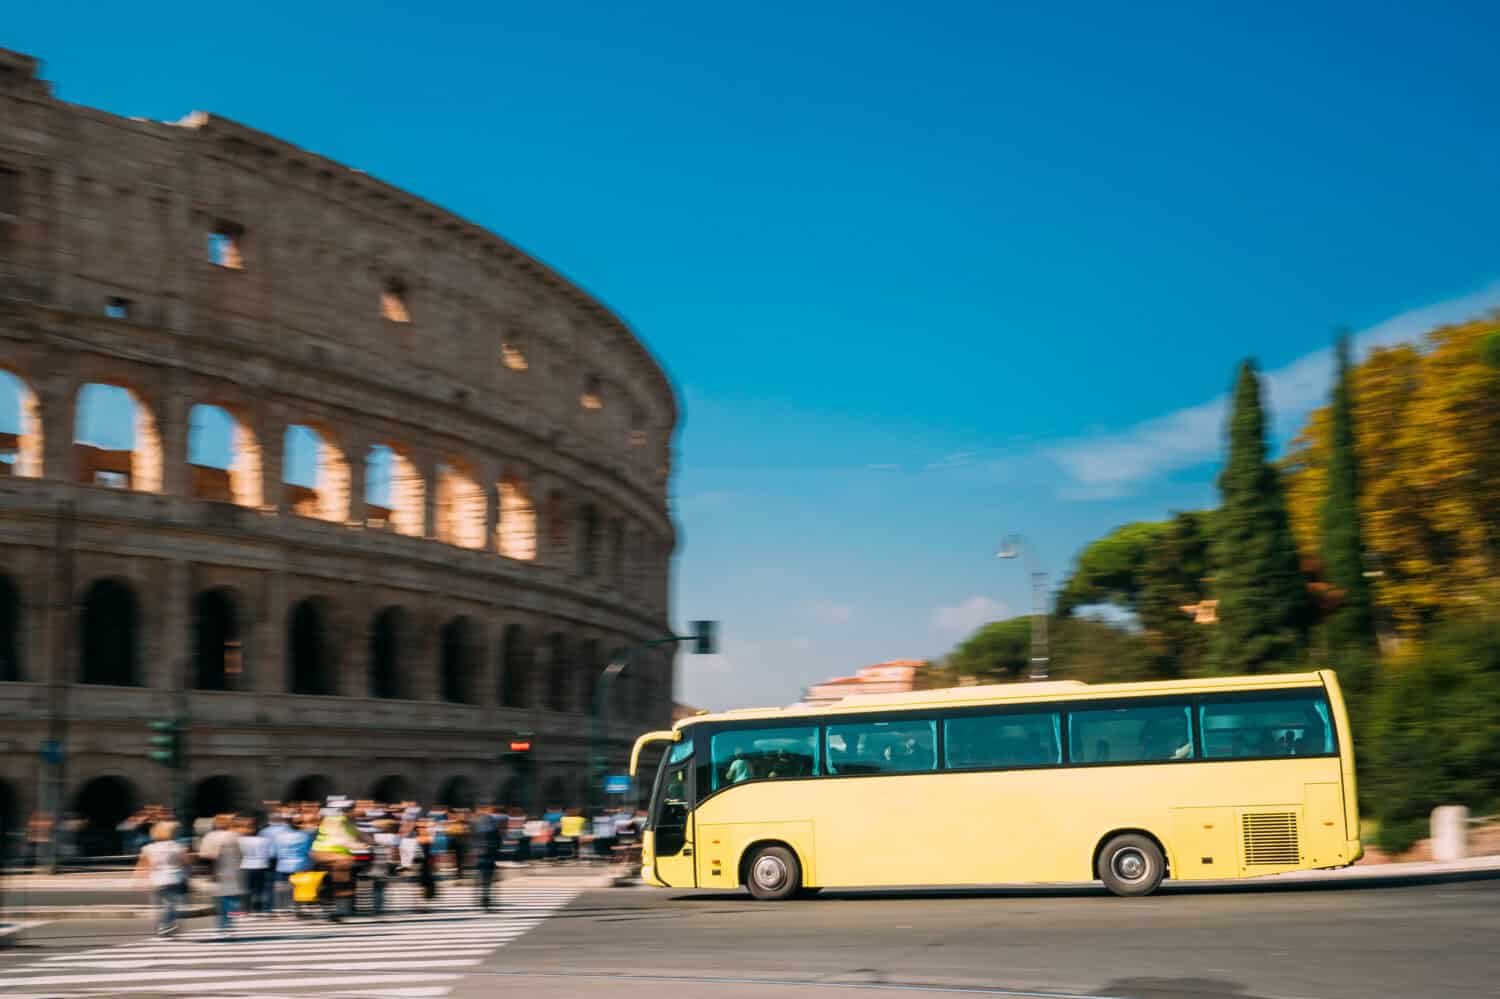 Rome, Italy. Colosseum. Yellow Bus Moving On Street Near Flavian Amphitheatre.